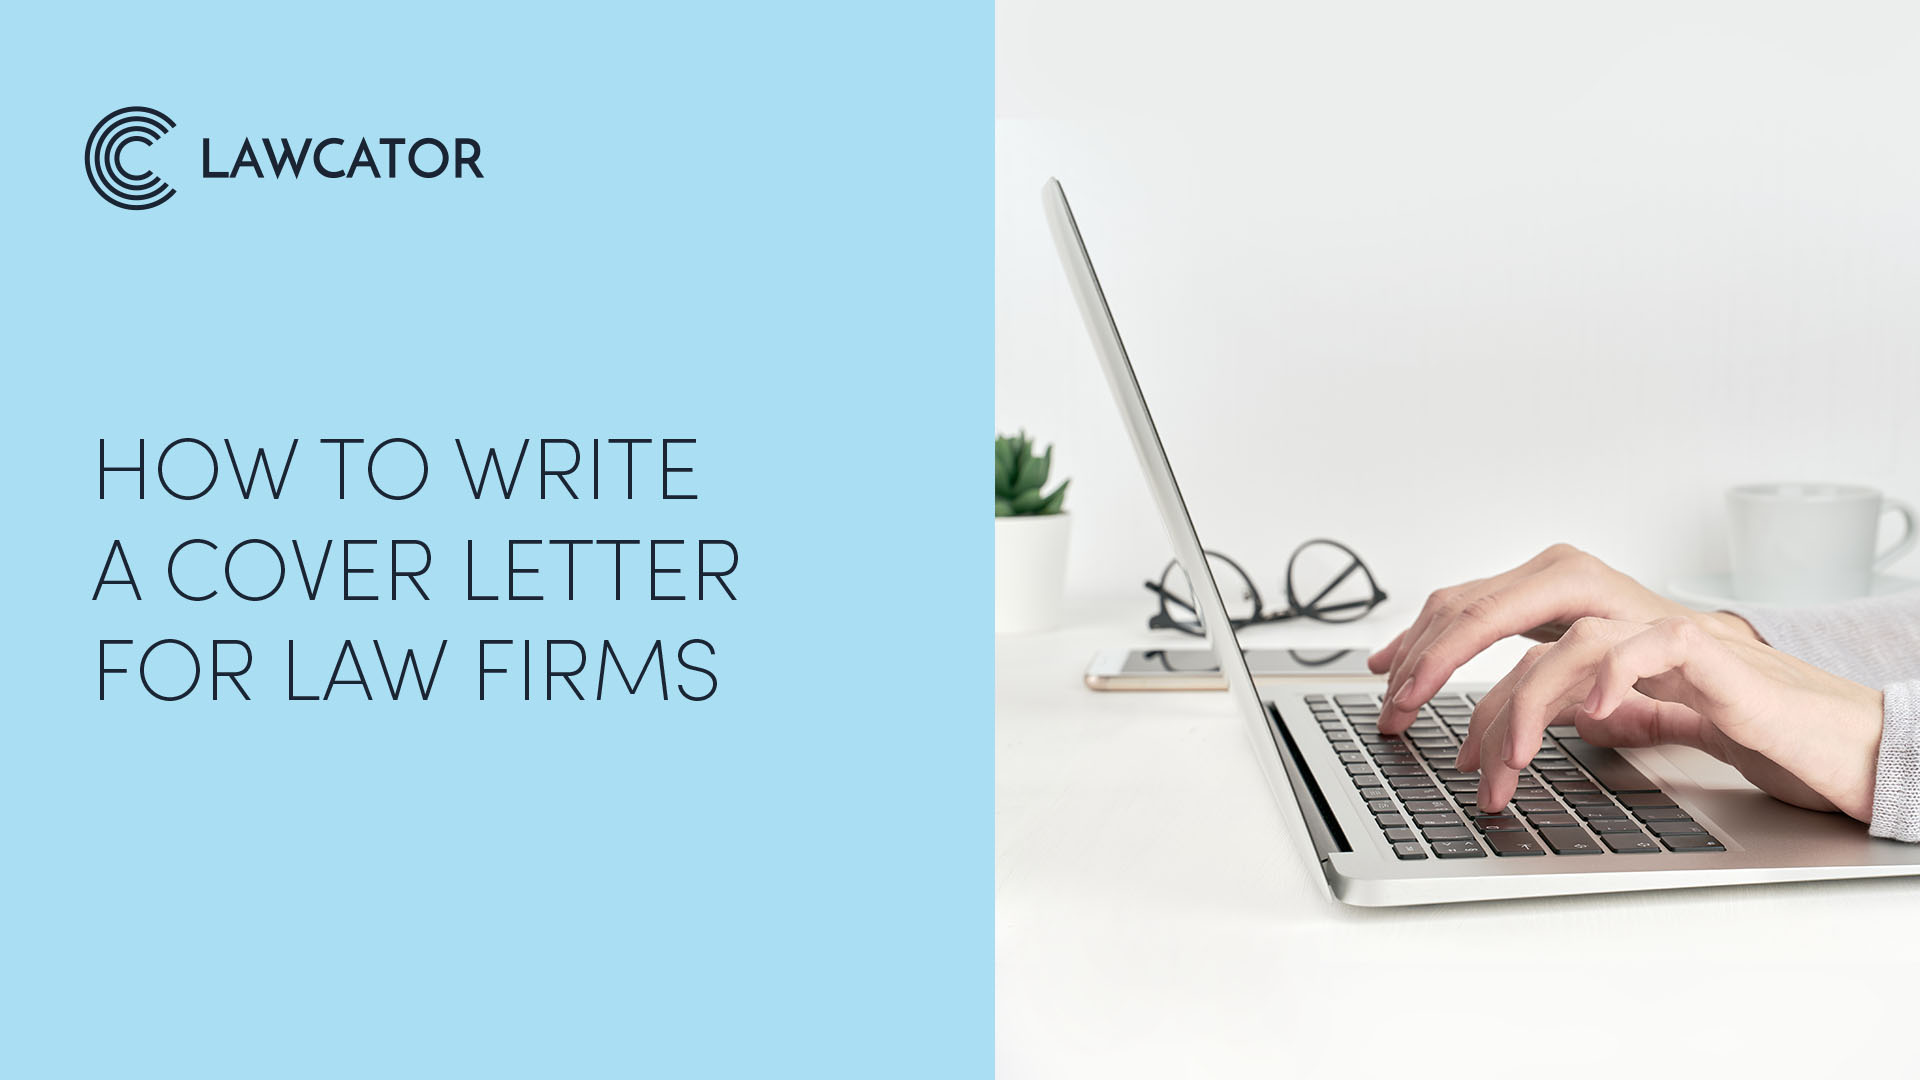 How to Write a Cover Letter for Law Firms